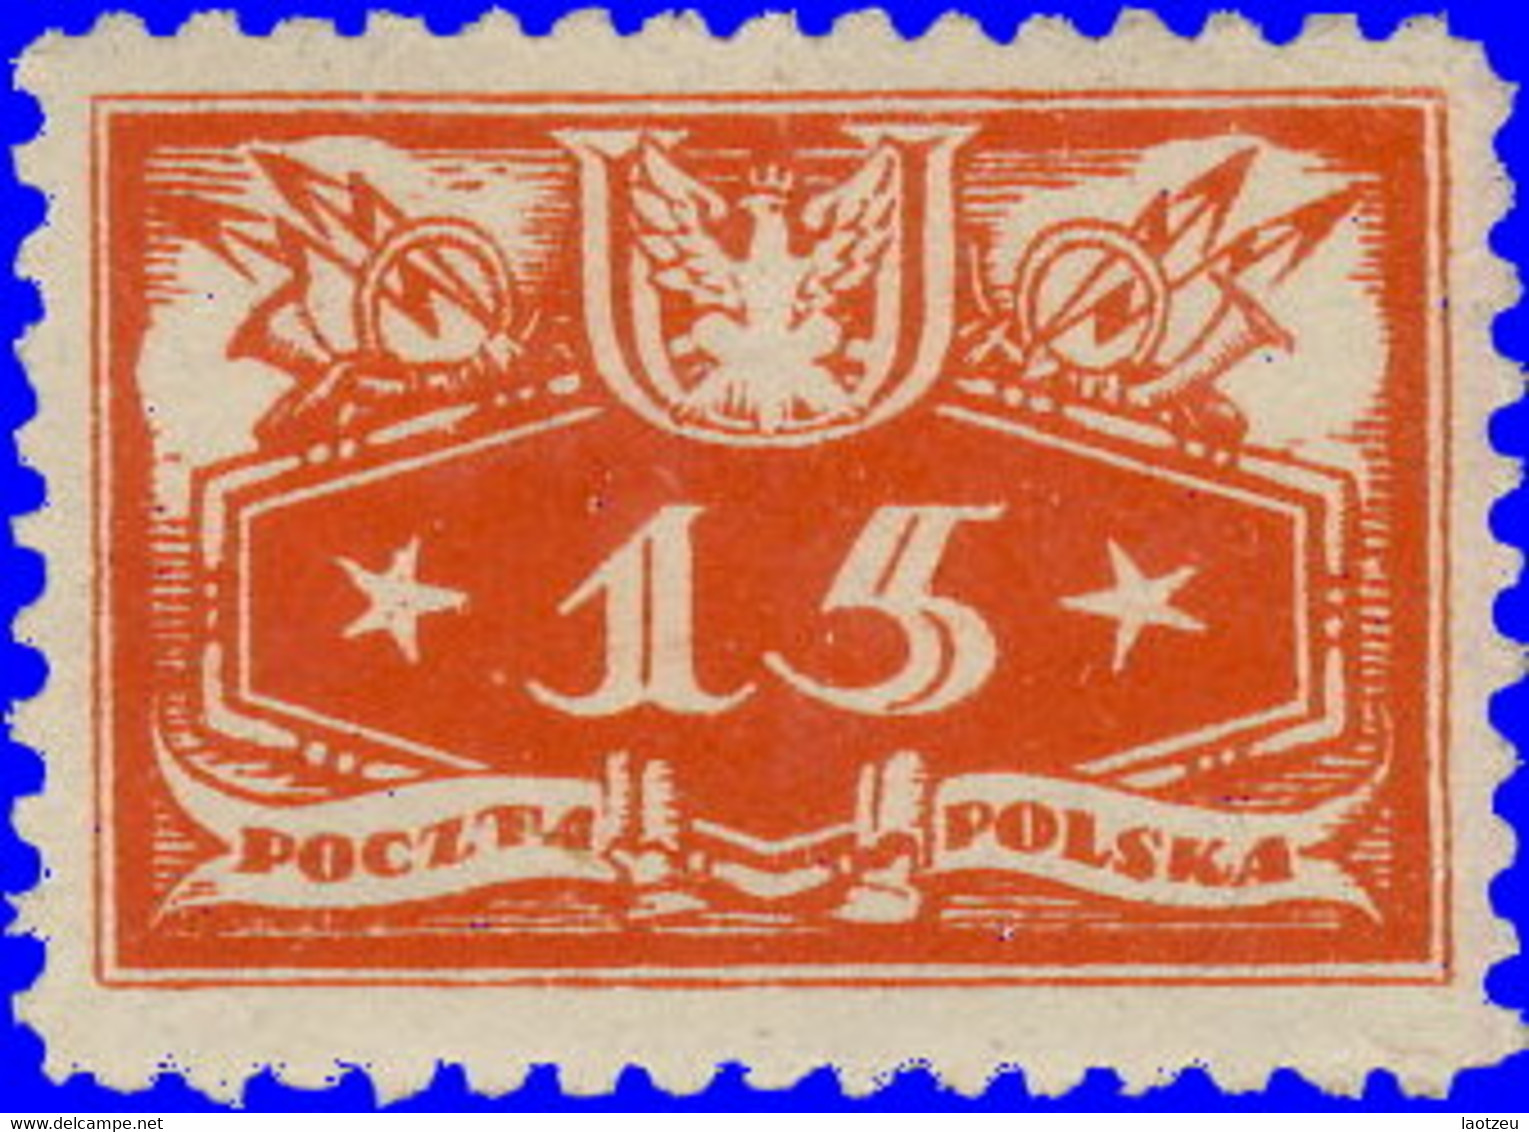 Pologne Service 1920. ~ S 4* - 15 F. Service - Officials